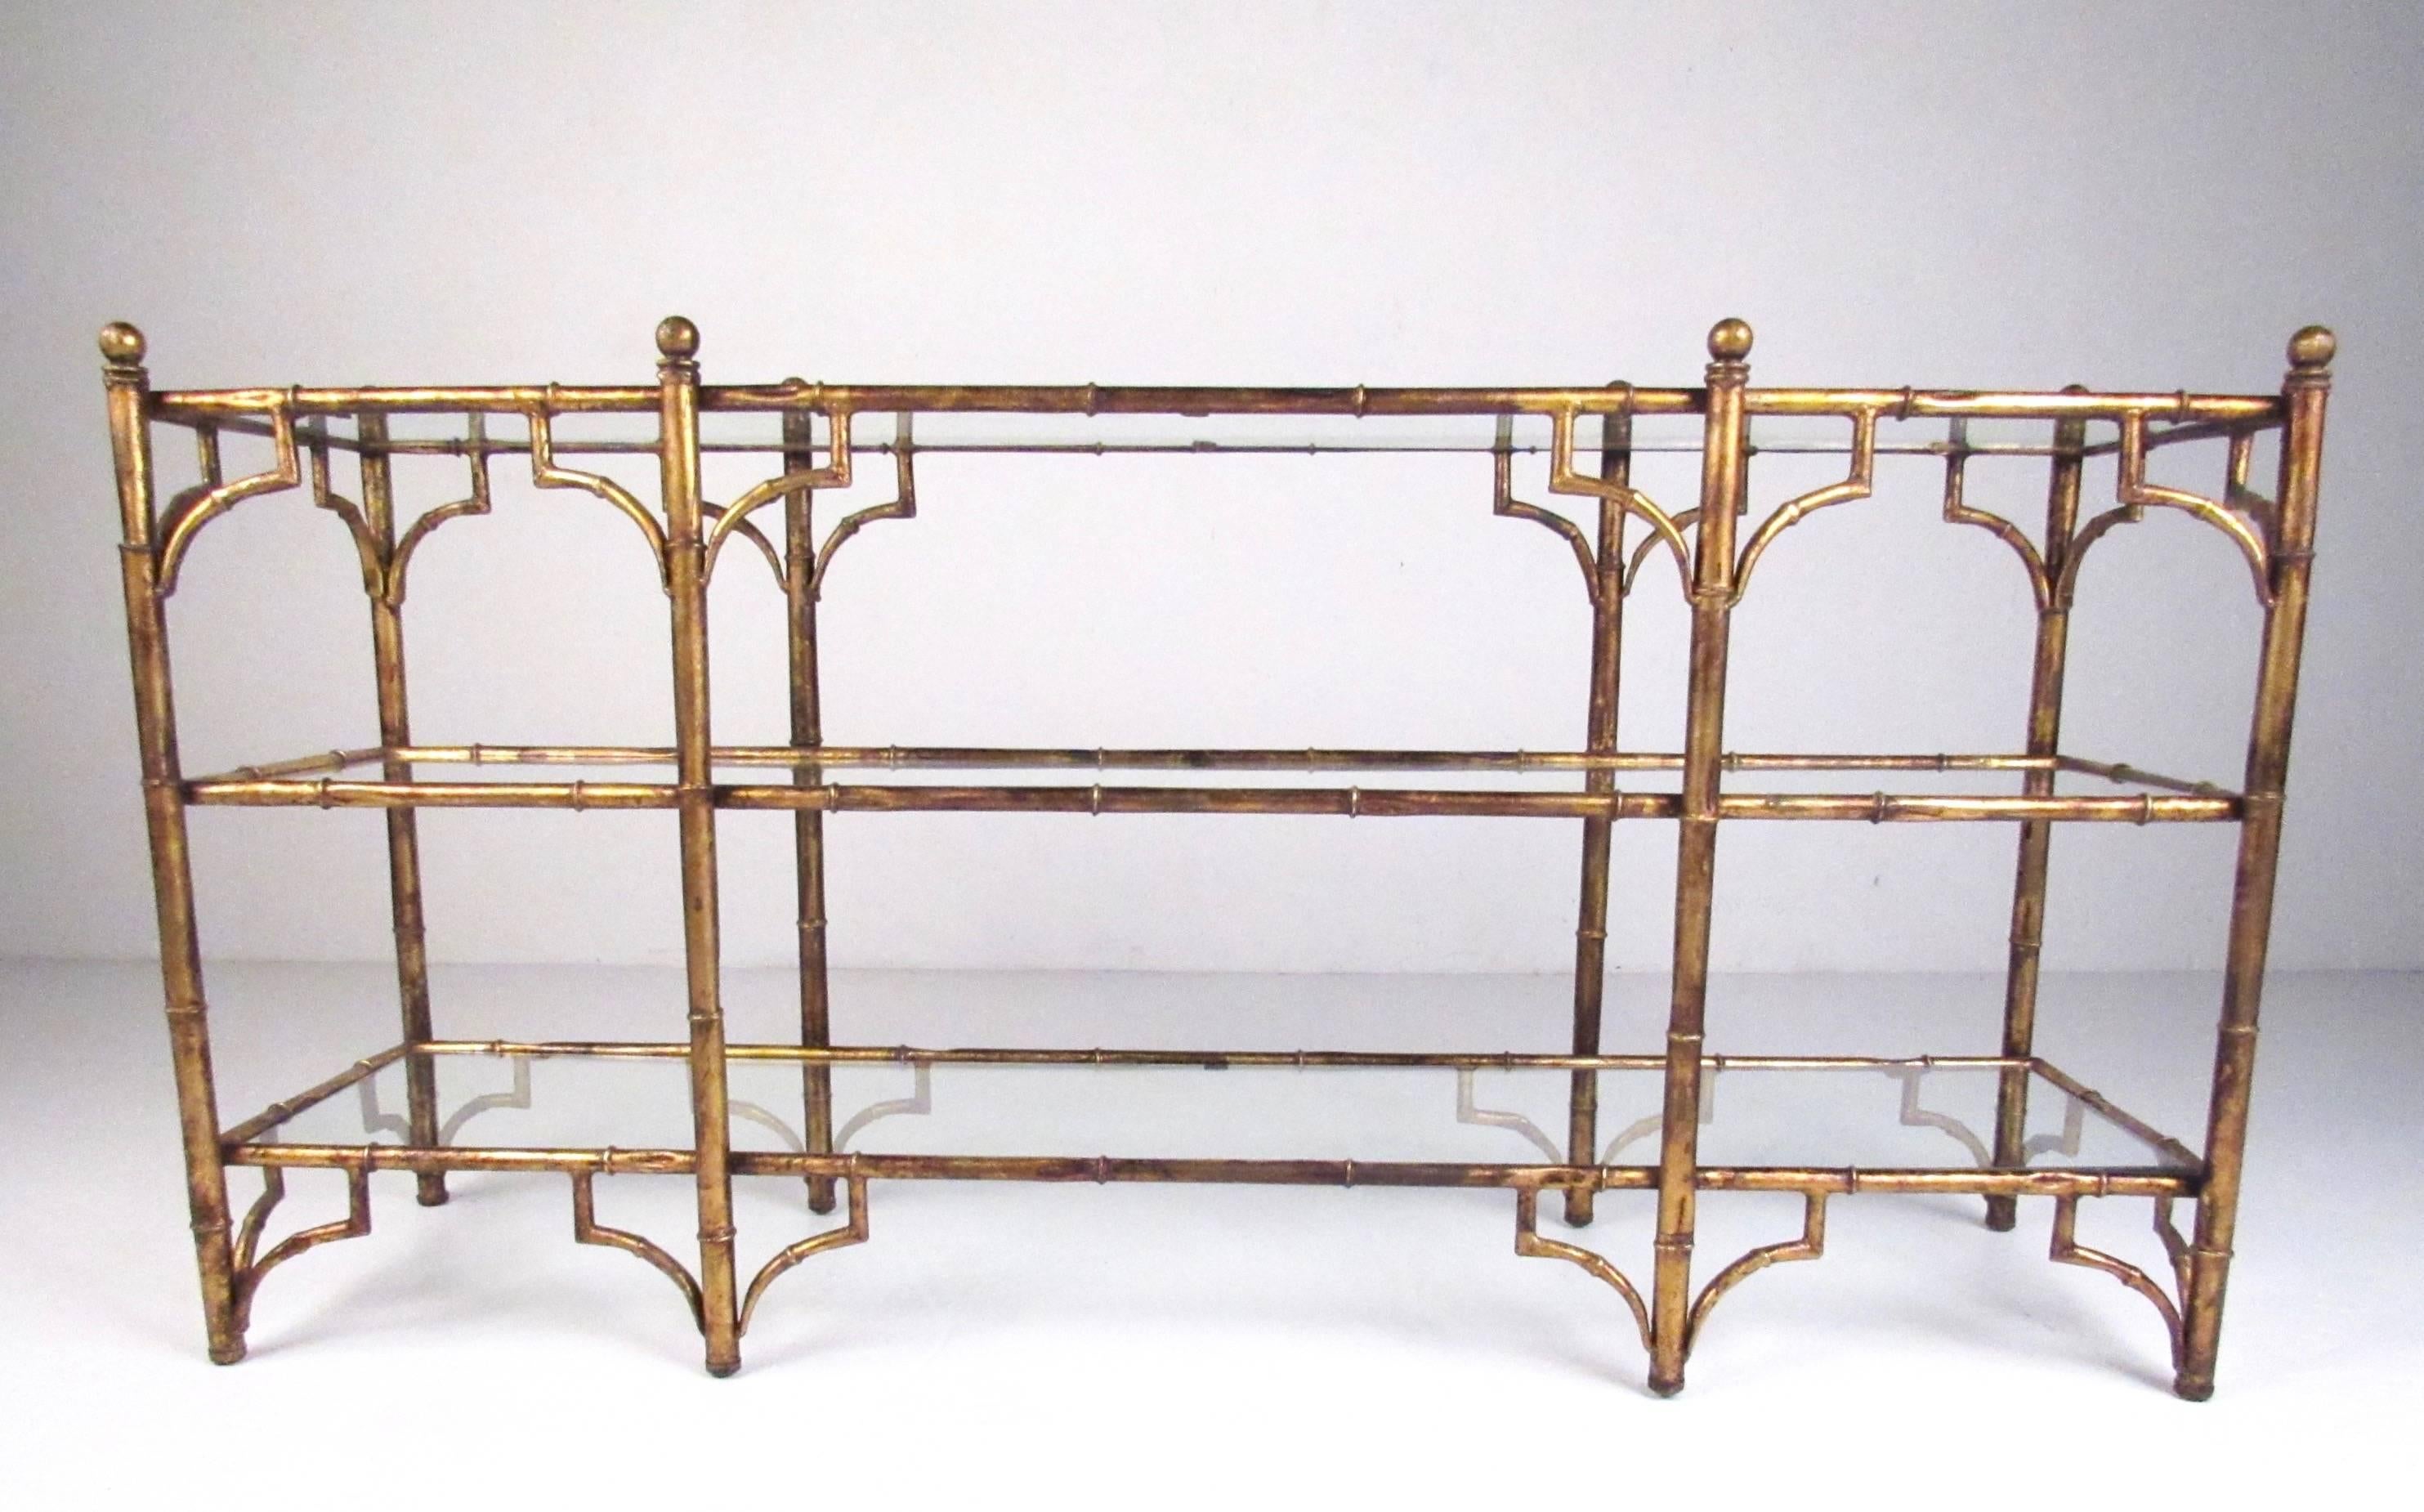 This unique decorator style console table features faux bamboo metal finish and three glass shelves for storage or display. Perfect piece for hall or entryway use, or for shop display. Please confirm item location (NY or NJ).